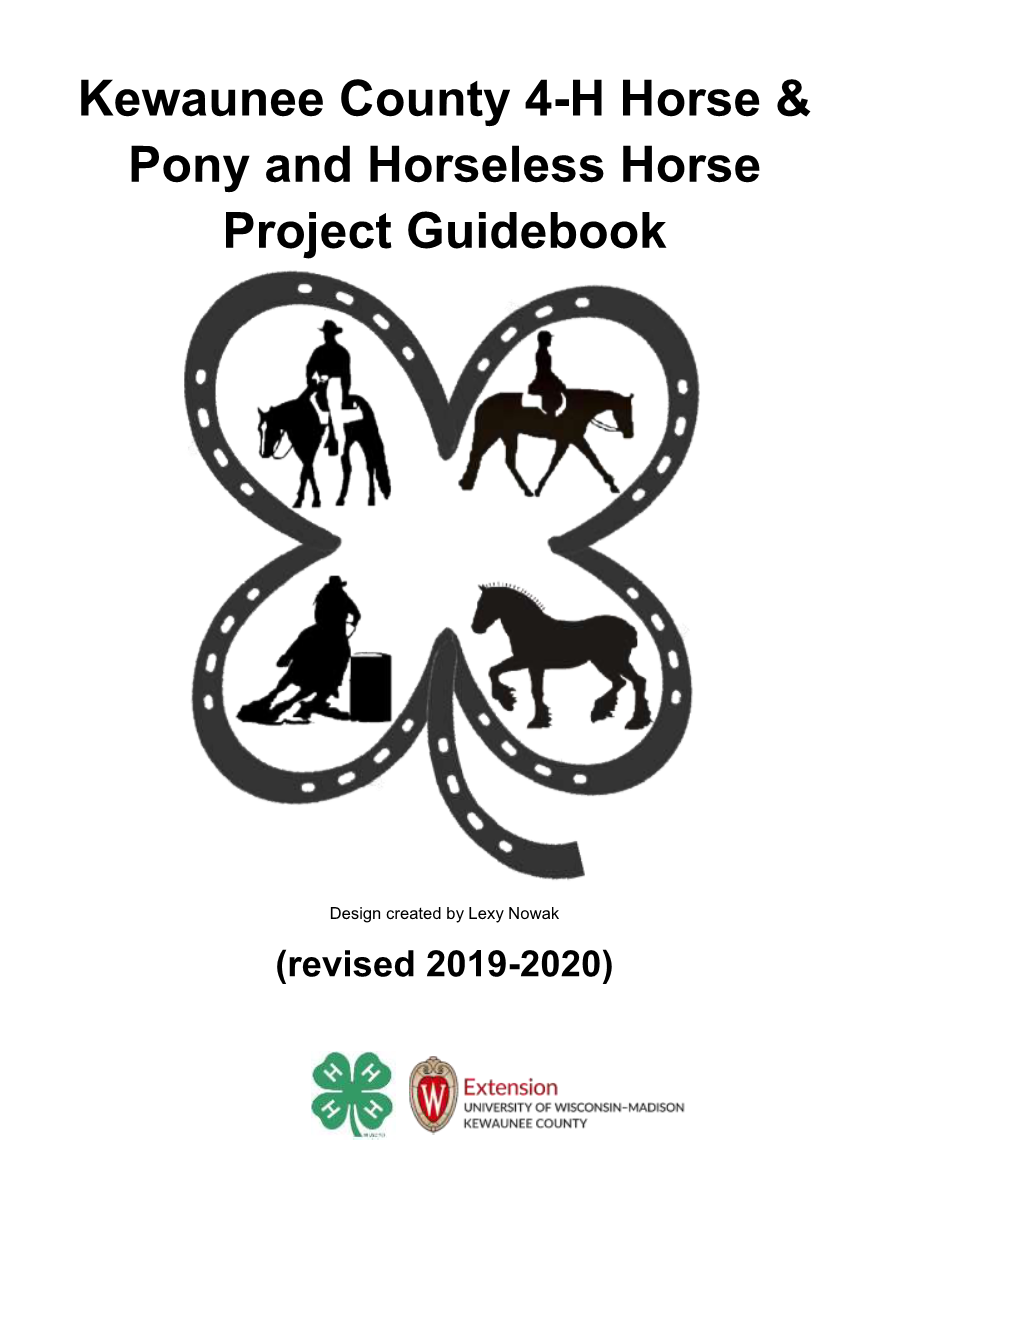 Kewaunee County 4-H Horse & Pony and Horseless Horse Project